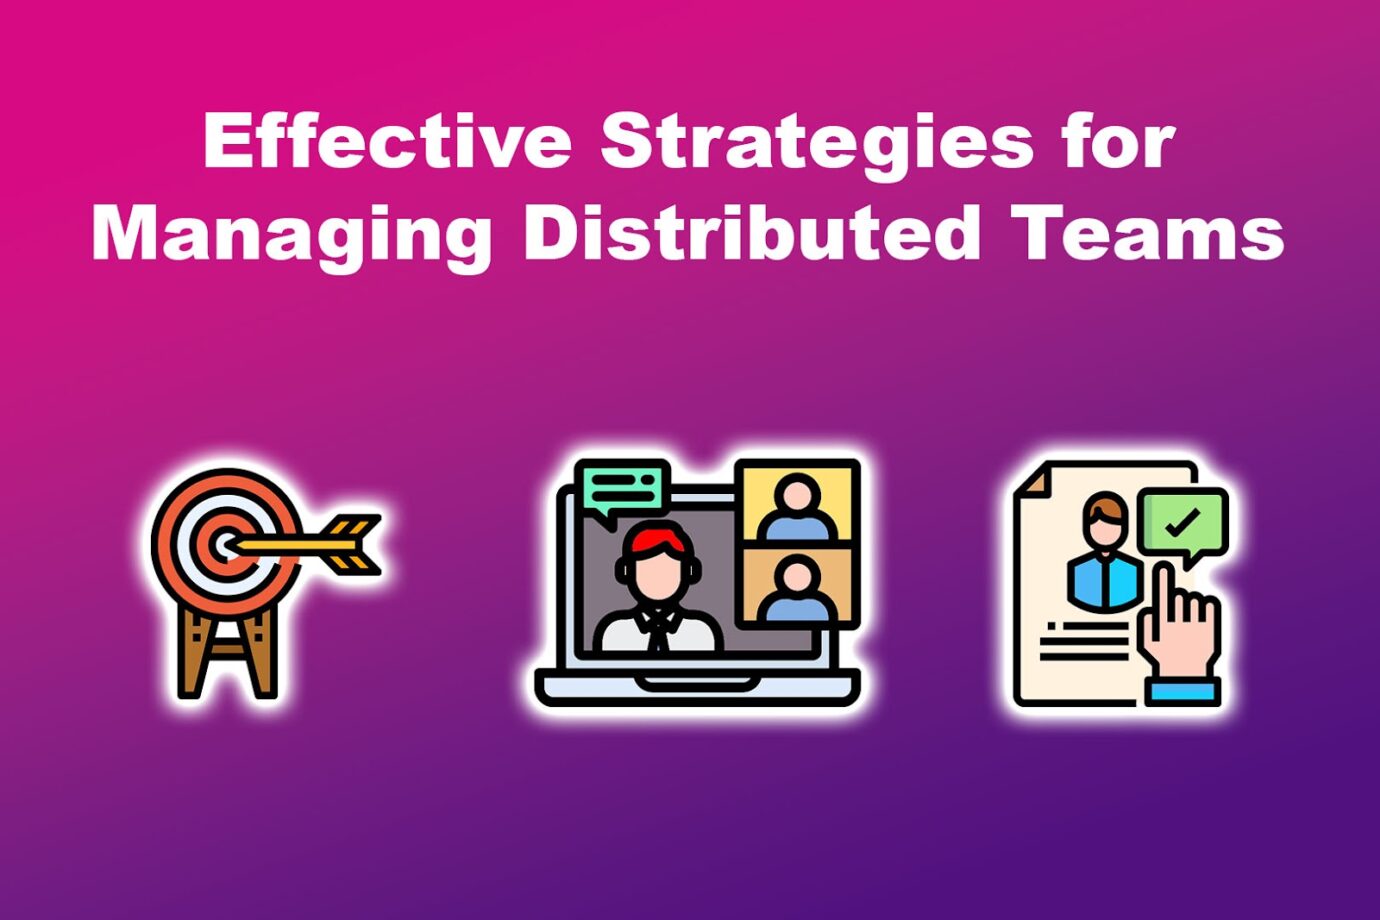 Effective Strategies for Managing Distributed Teams